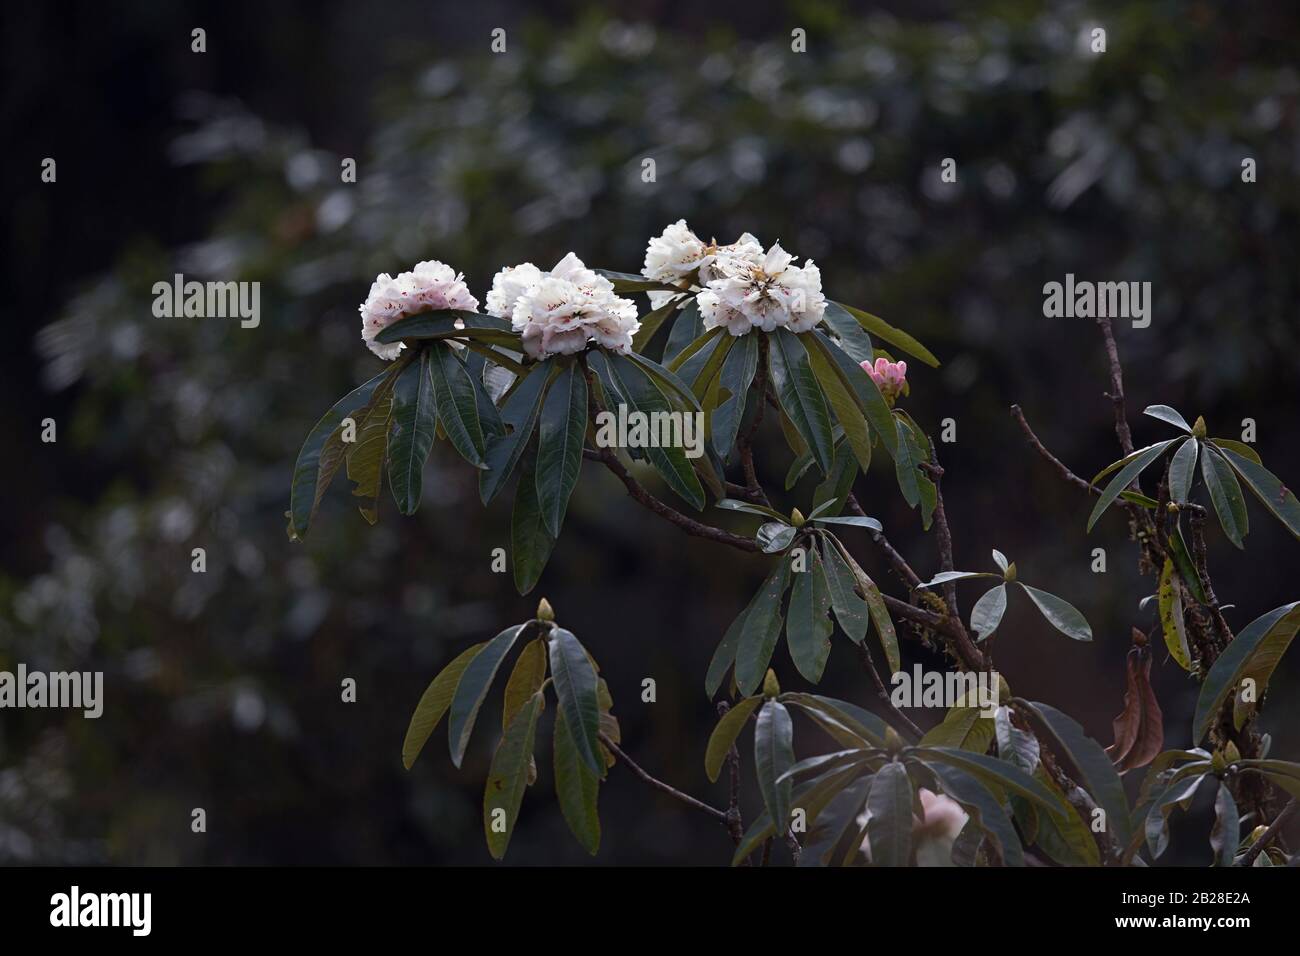 Flowering white Rhododendron in the forest of the bhutanese himalayan foothills Stock Photo